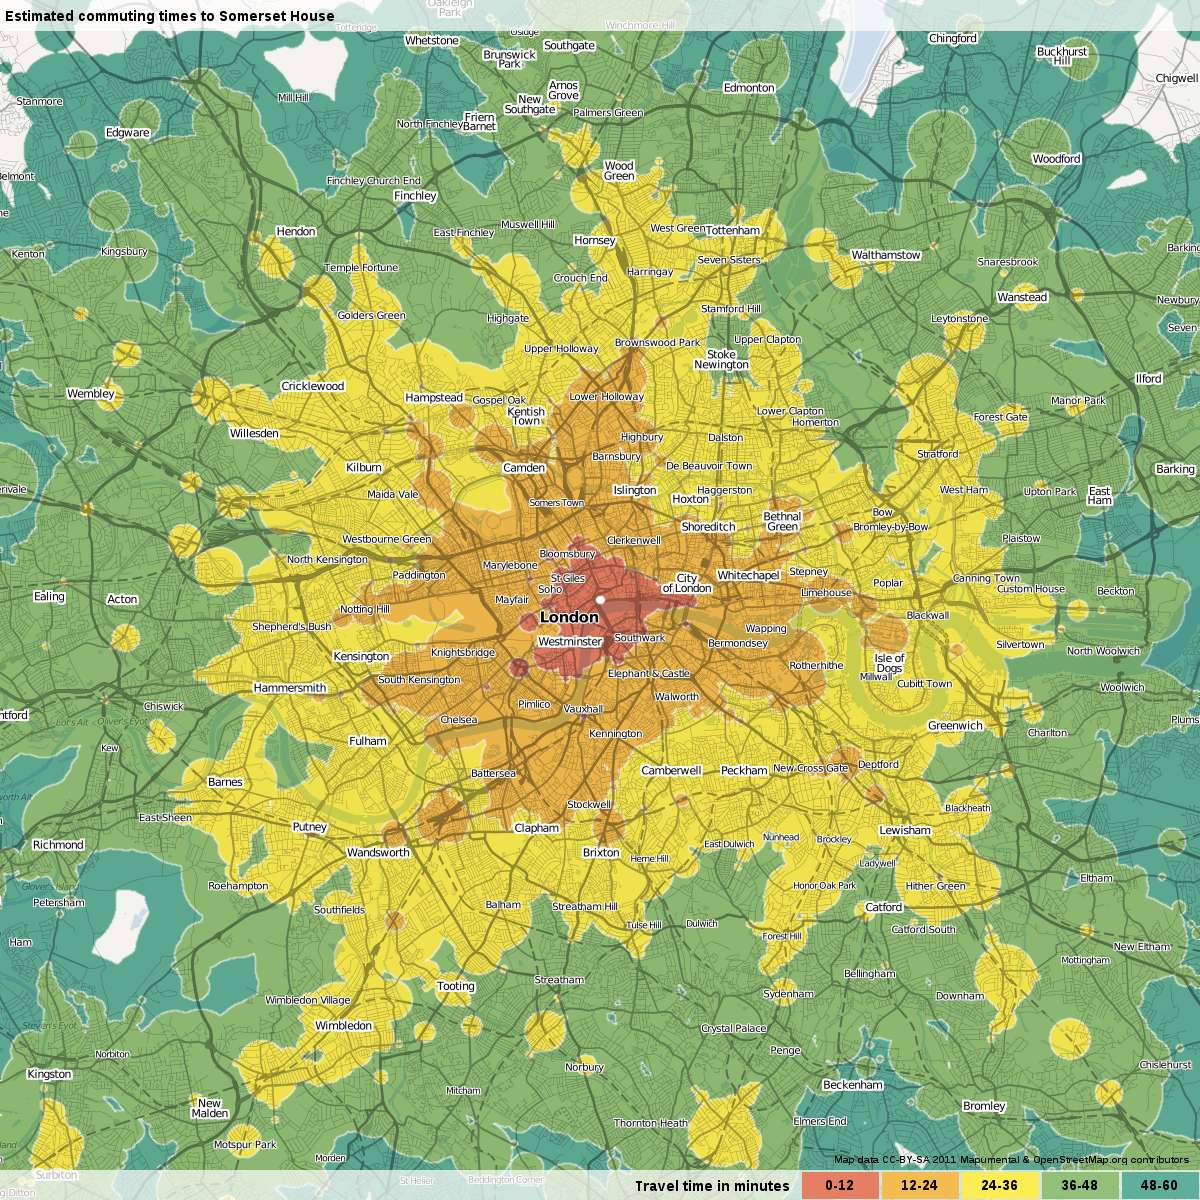 Map of travel times to Somerset House in London from surrounding area.